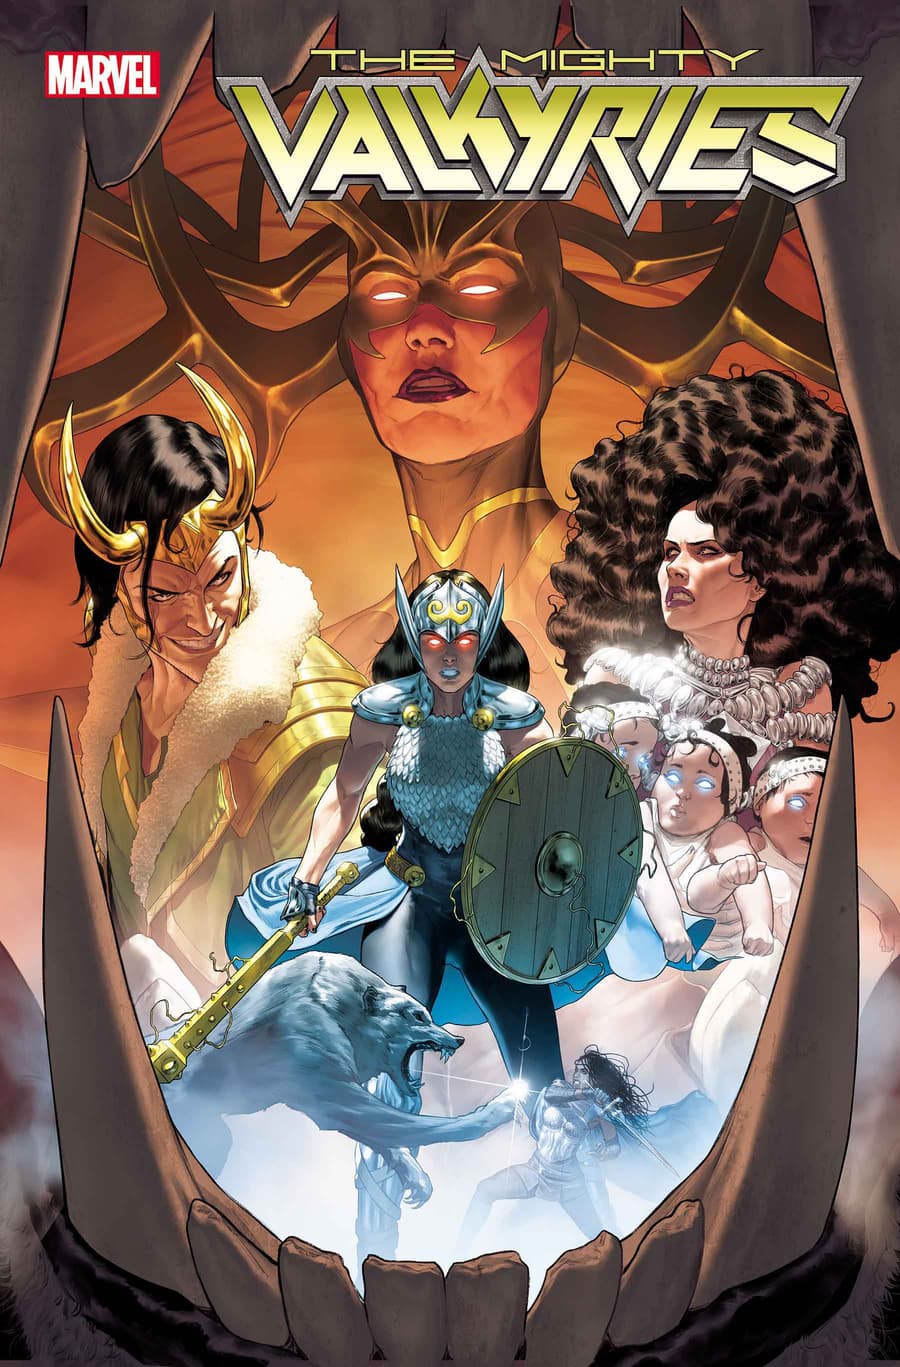 'The Mighty Valkyries' #1